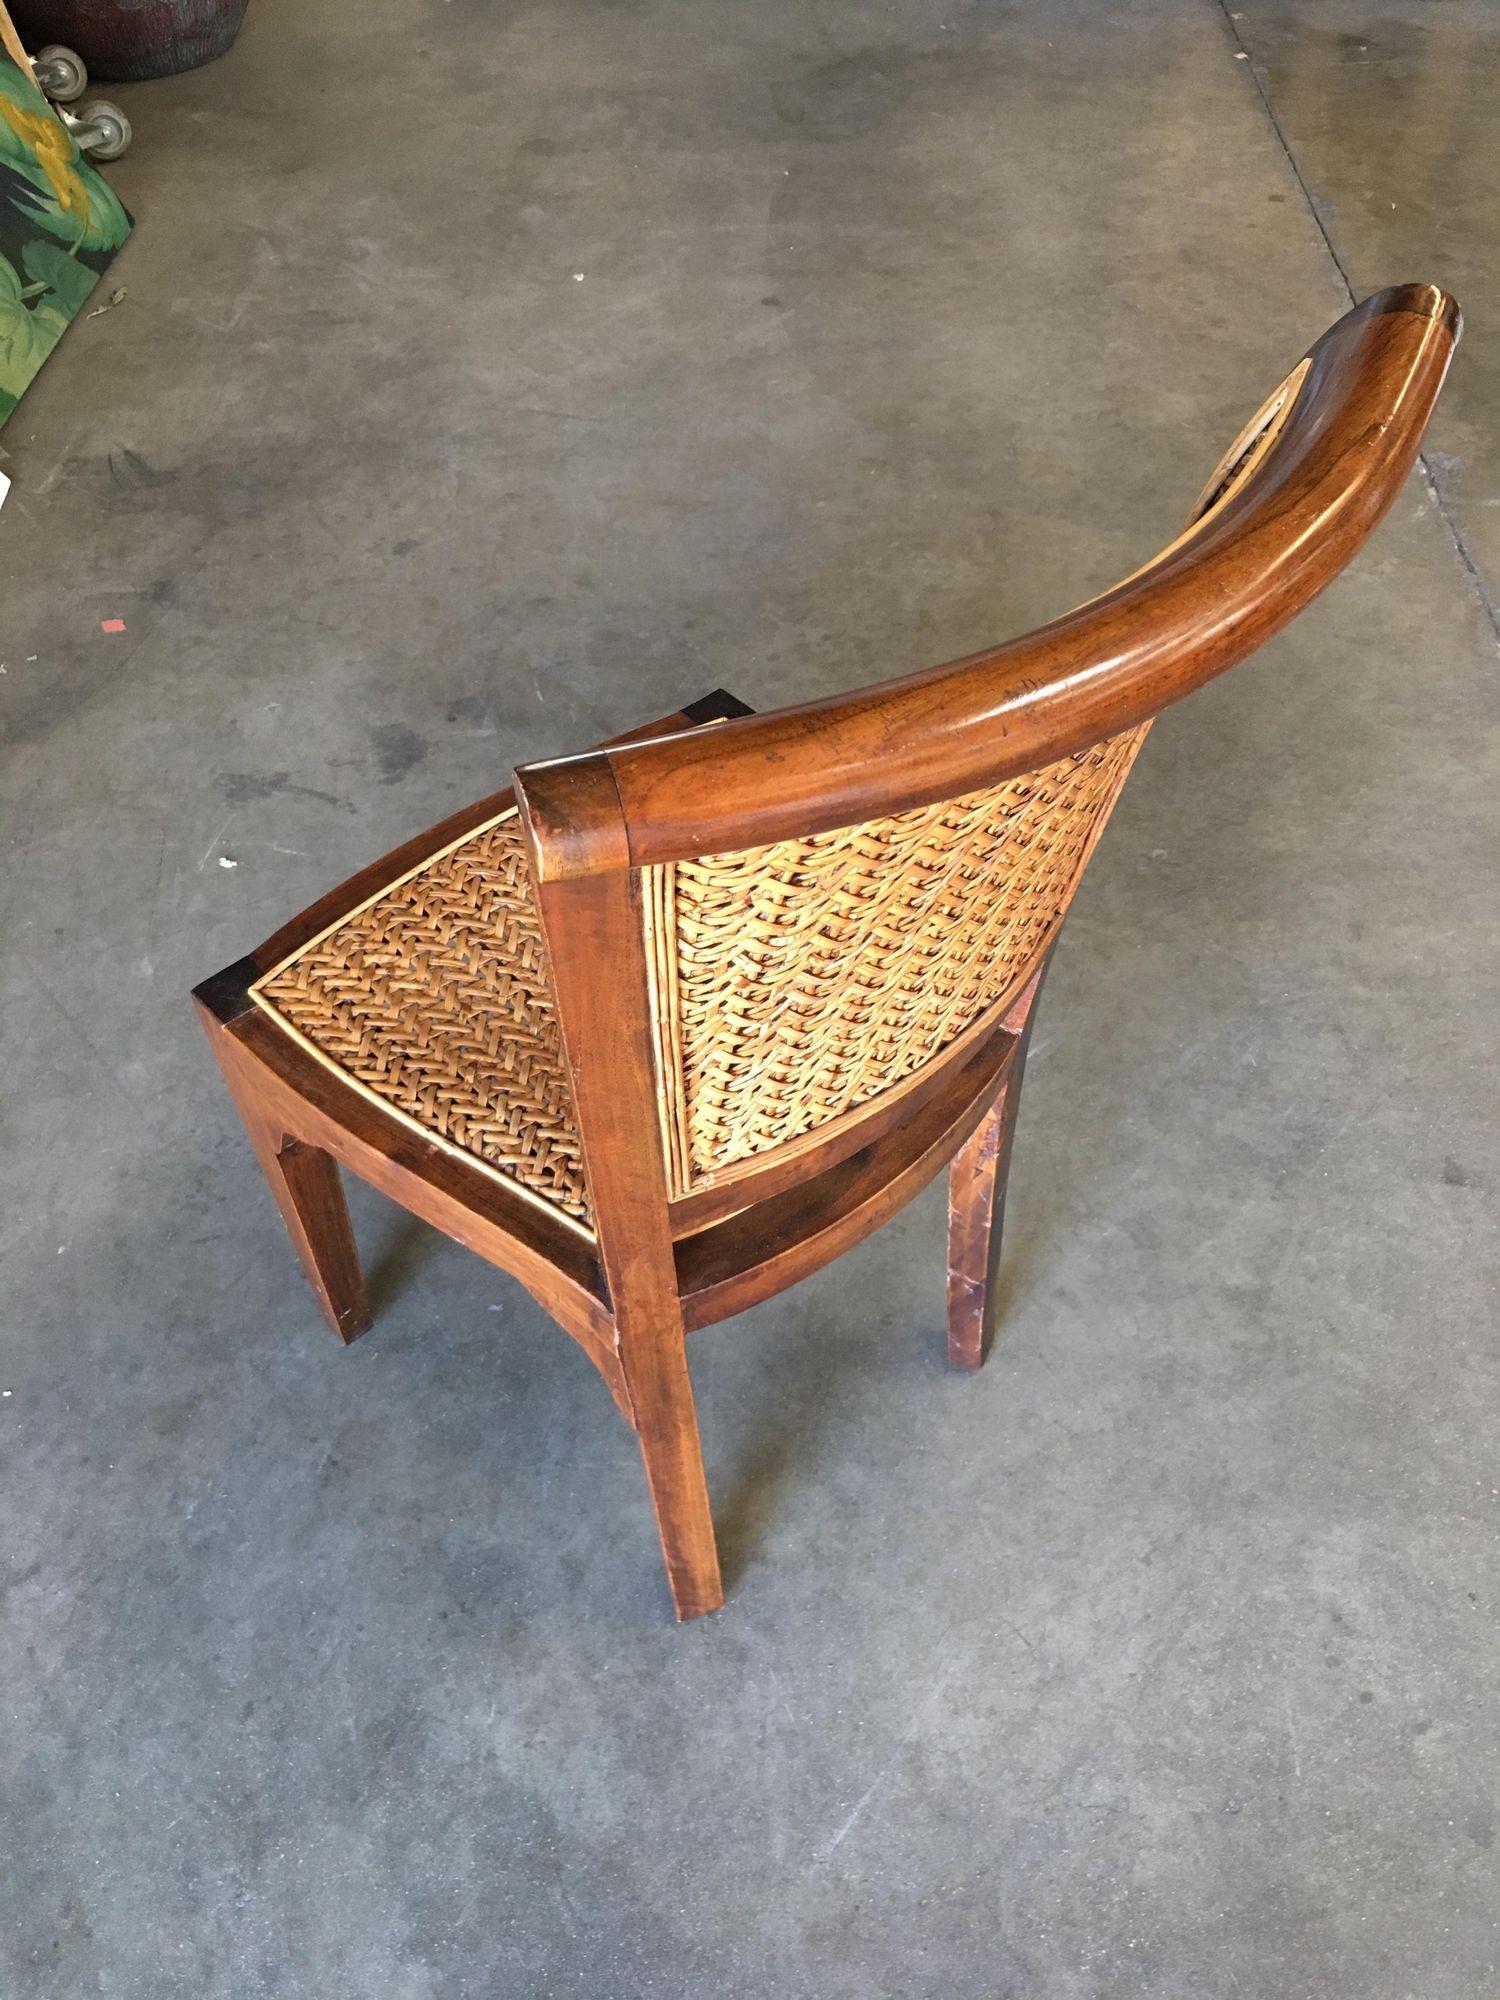 Wood High Style Midcentury Mahogany Dining Chair with Woven Wicker Seat For Sale